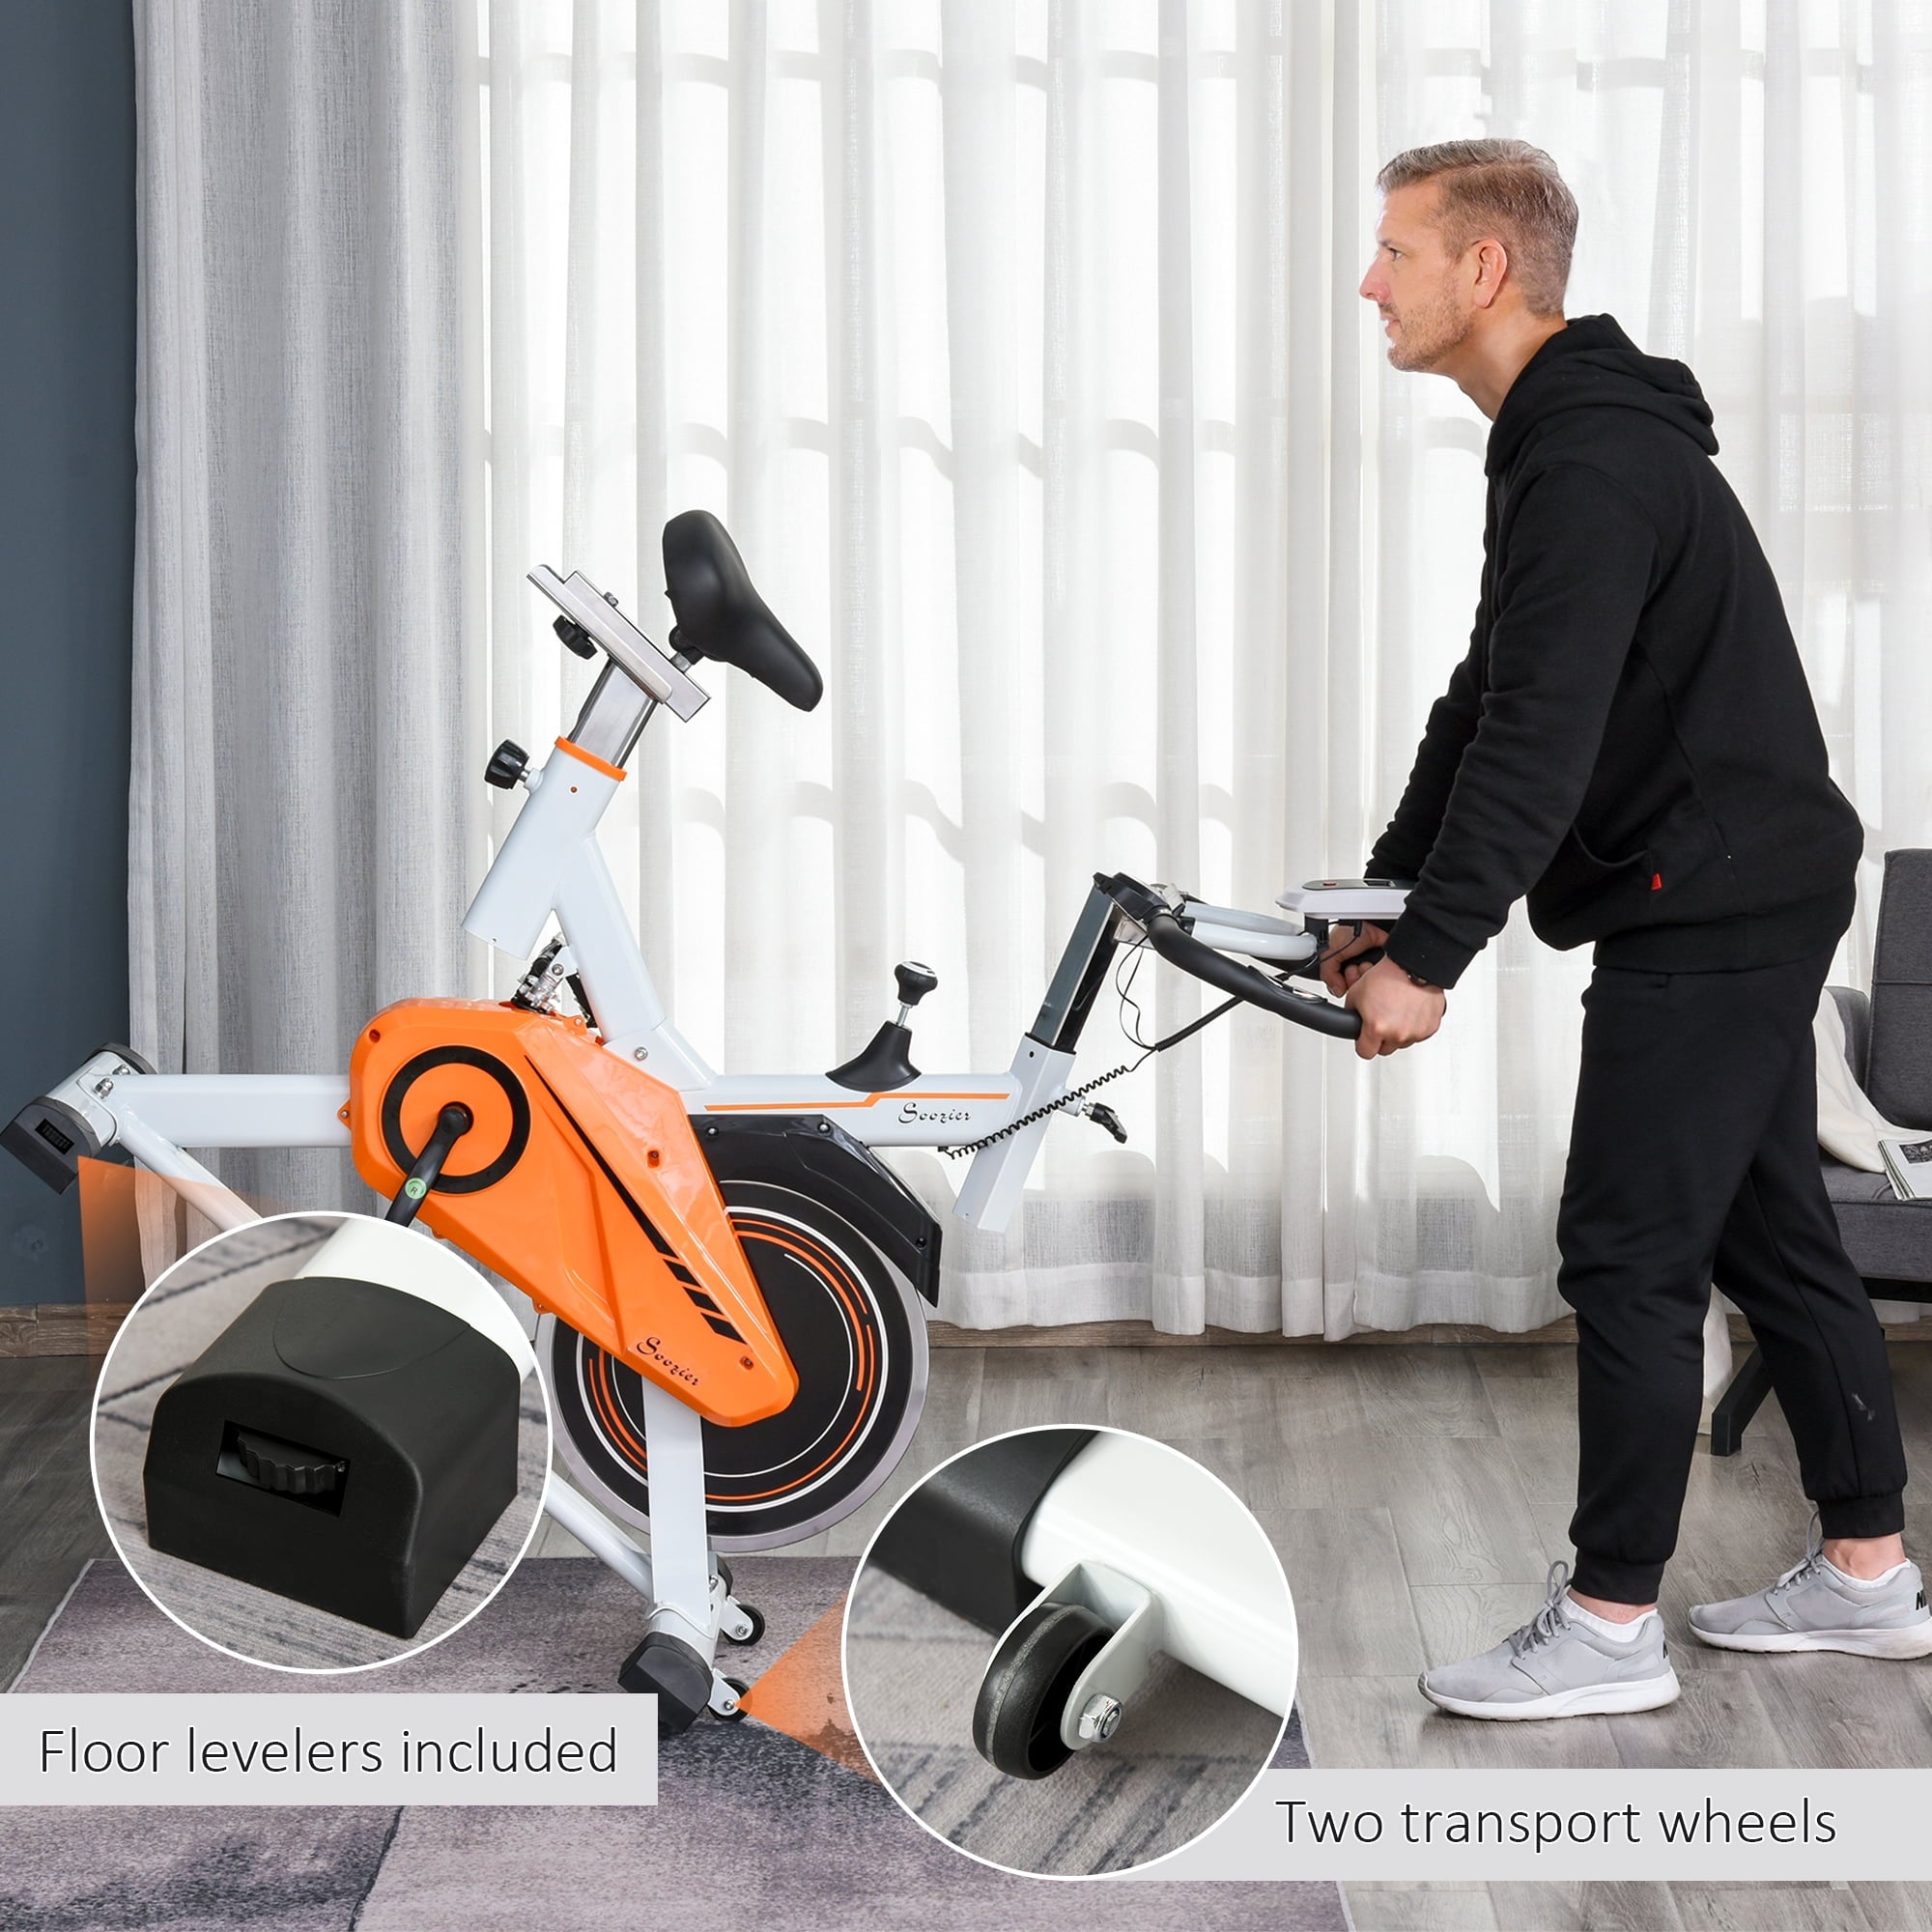 Soozier 29 lb Flywheel Indoor Stationary Cycling Exercise Bike with LCD Monitor